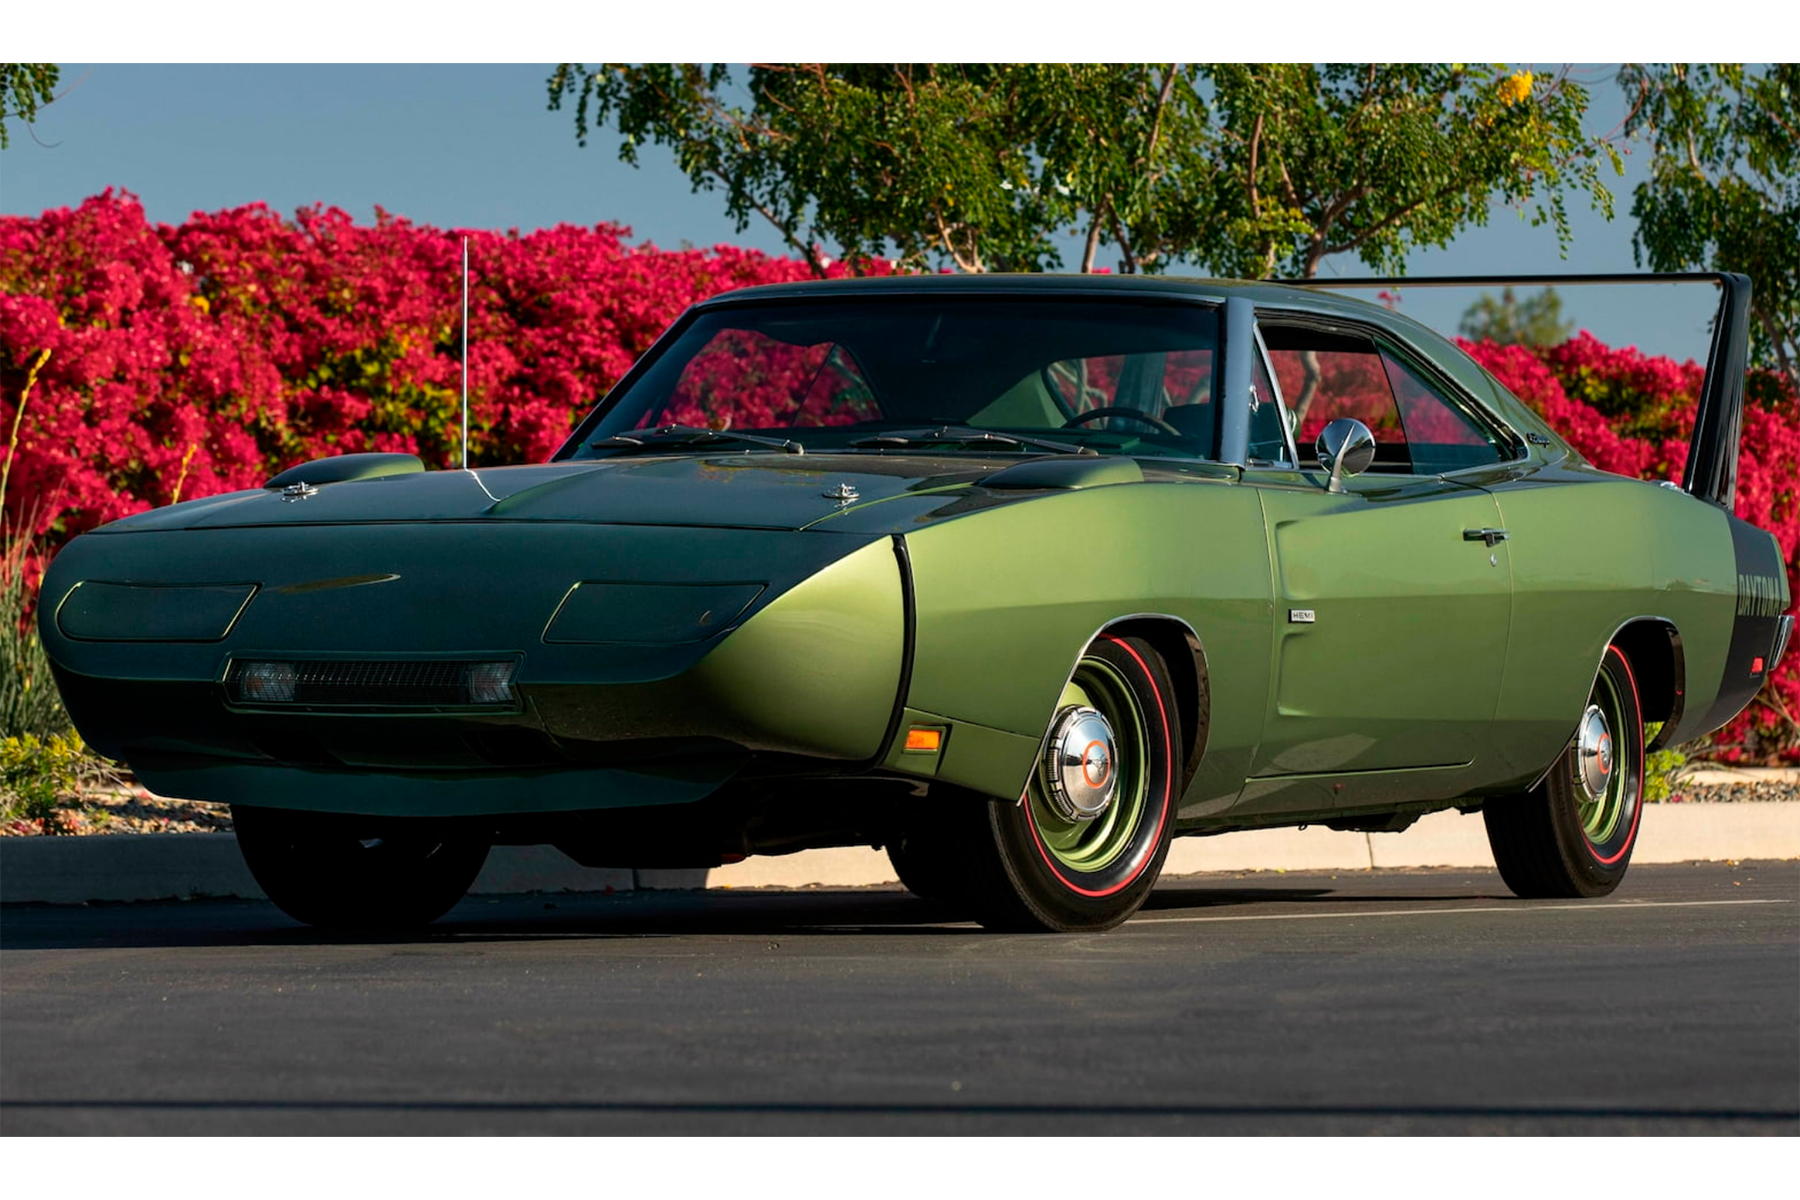 Highly optioned Dodge Charger Daytona sets new auction record | Driving